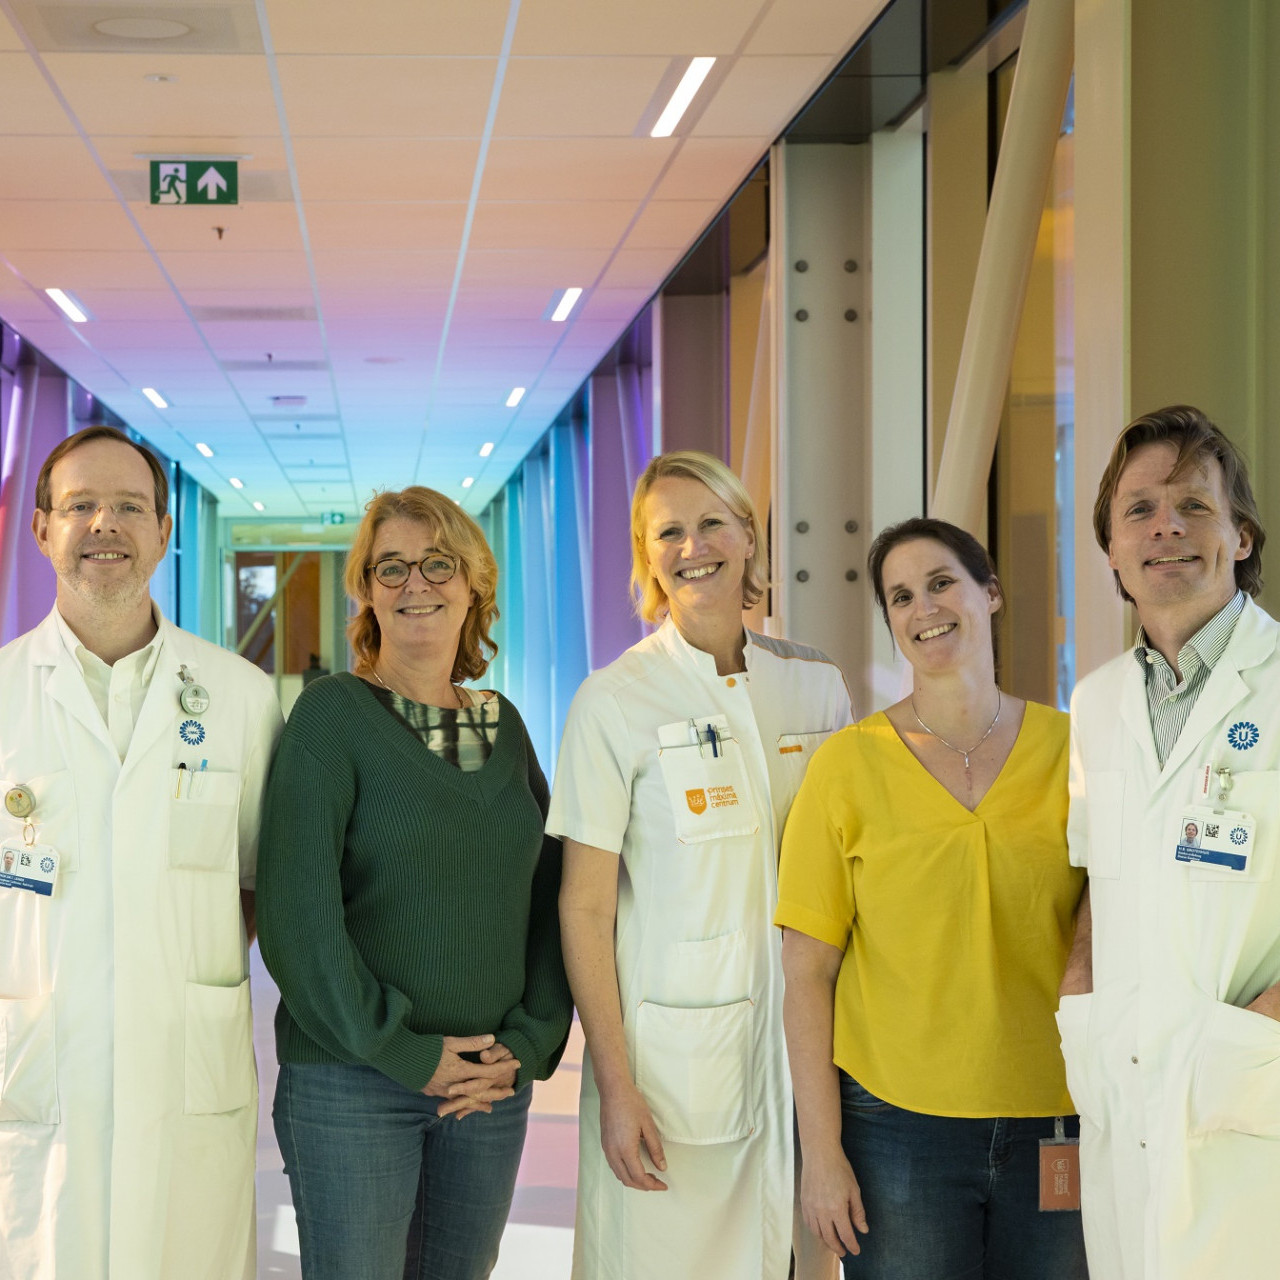 Maarten van der Weijden foundation and KiKa grant over hundred thousand euro for research into early detection of heart damage associated with childhood cancer